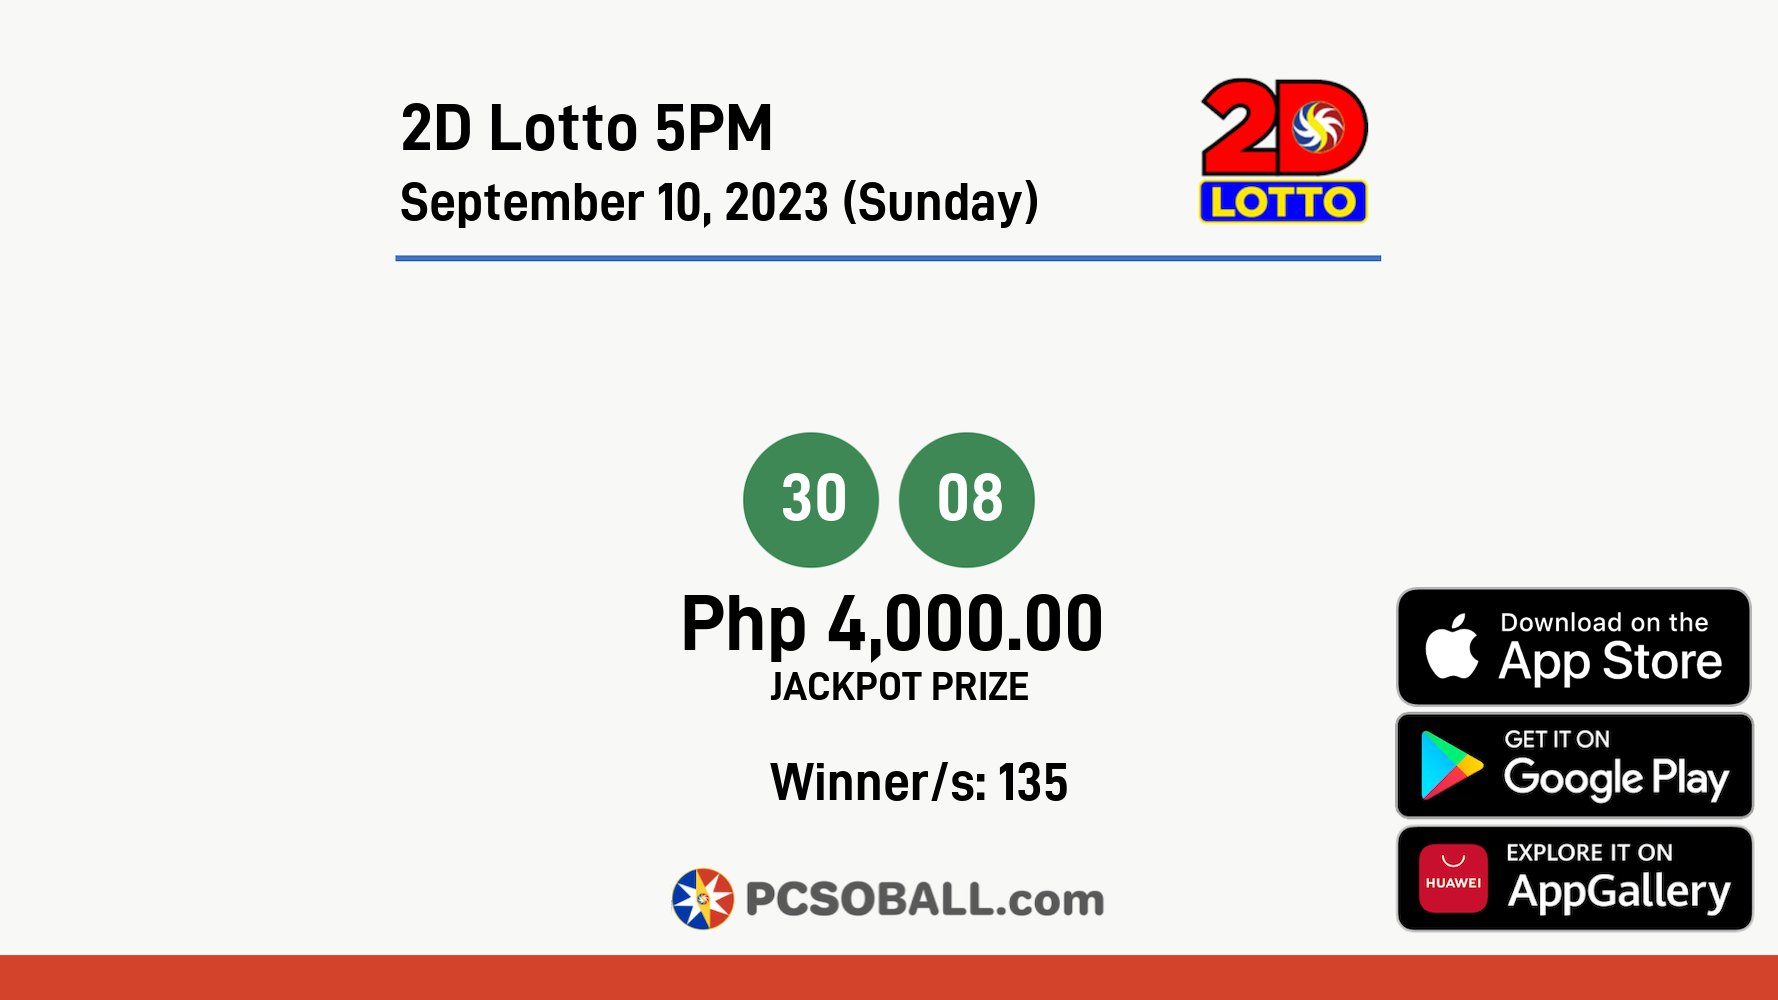 2D Lotto 5PM September 10, 2023 (Sunday) Result